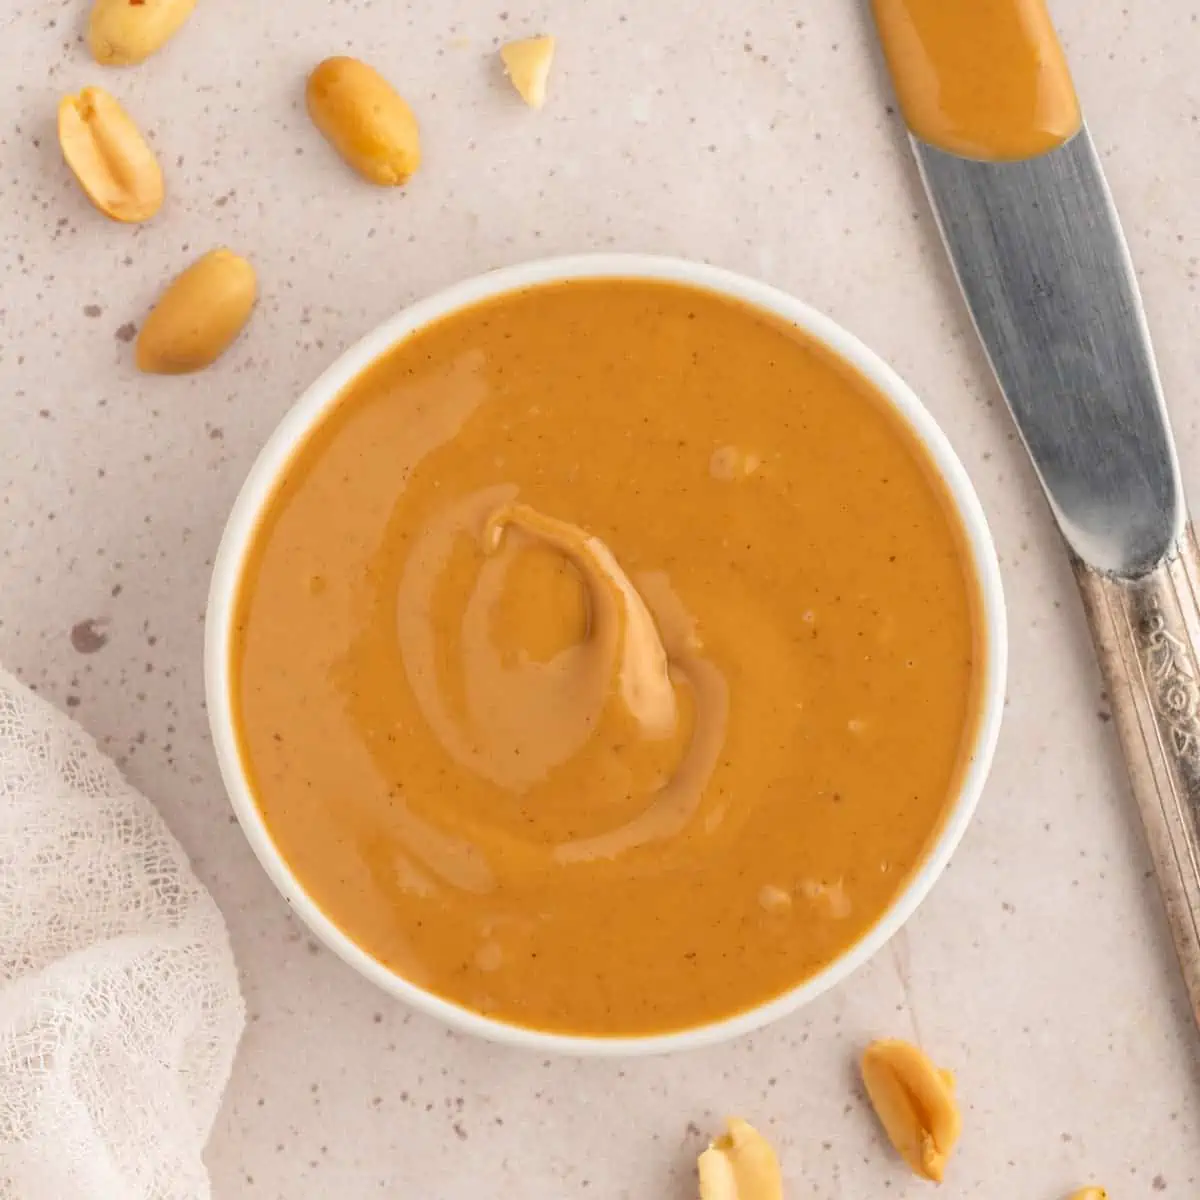 Homemade peanut butter in a white dish with peanuts.